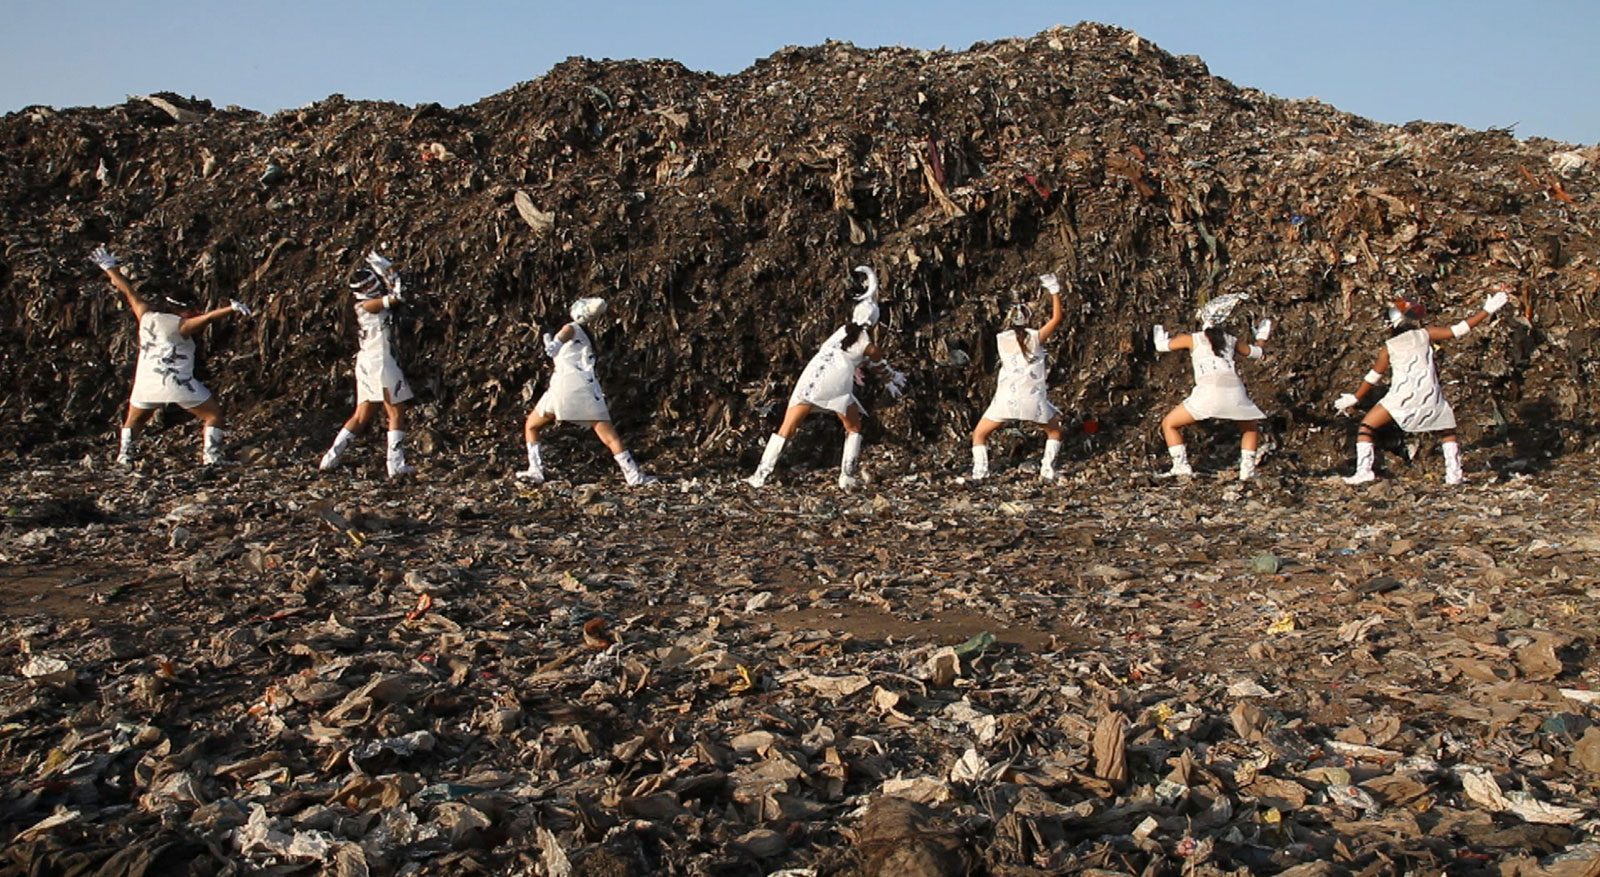 Tejal Shah, 'Between the Waves - Landfill Dance,' HD Video, 2012. Courtesy of the artist, Barbara Gross Galerie, Munich, and Project 88, Mumbai.